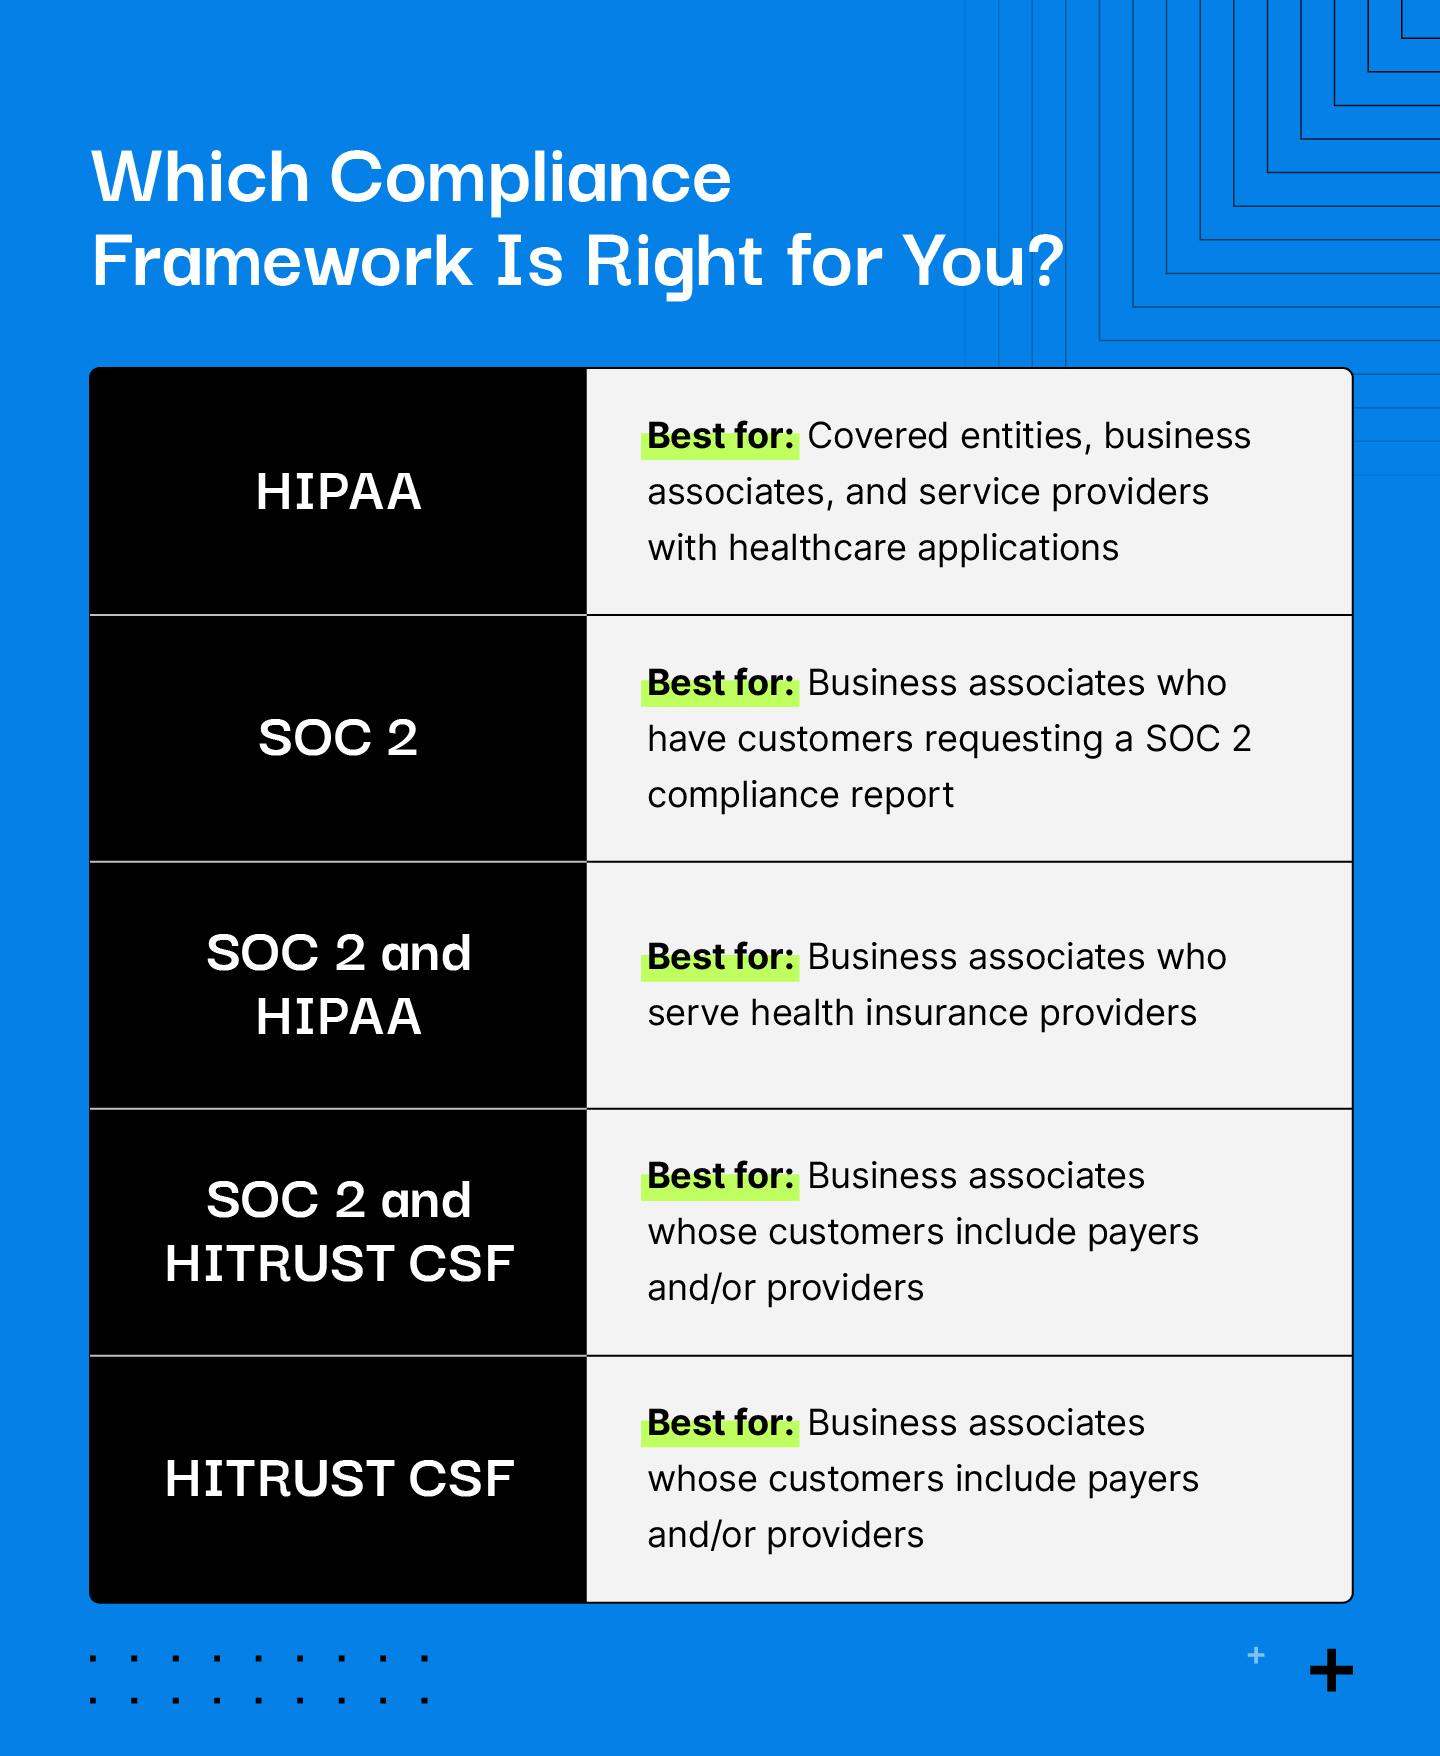 Which Compliance Framework Is Right for You (HIPAA vs HITRUST) image